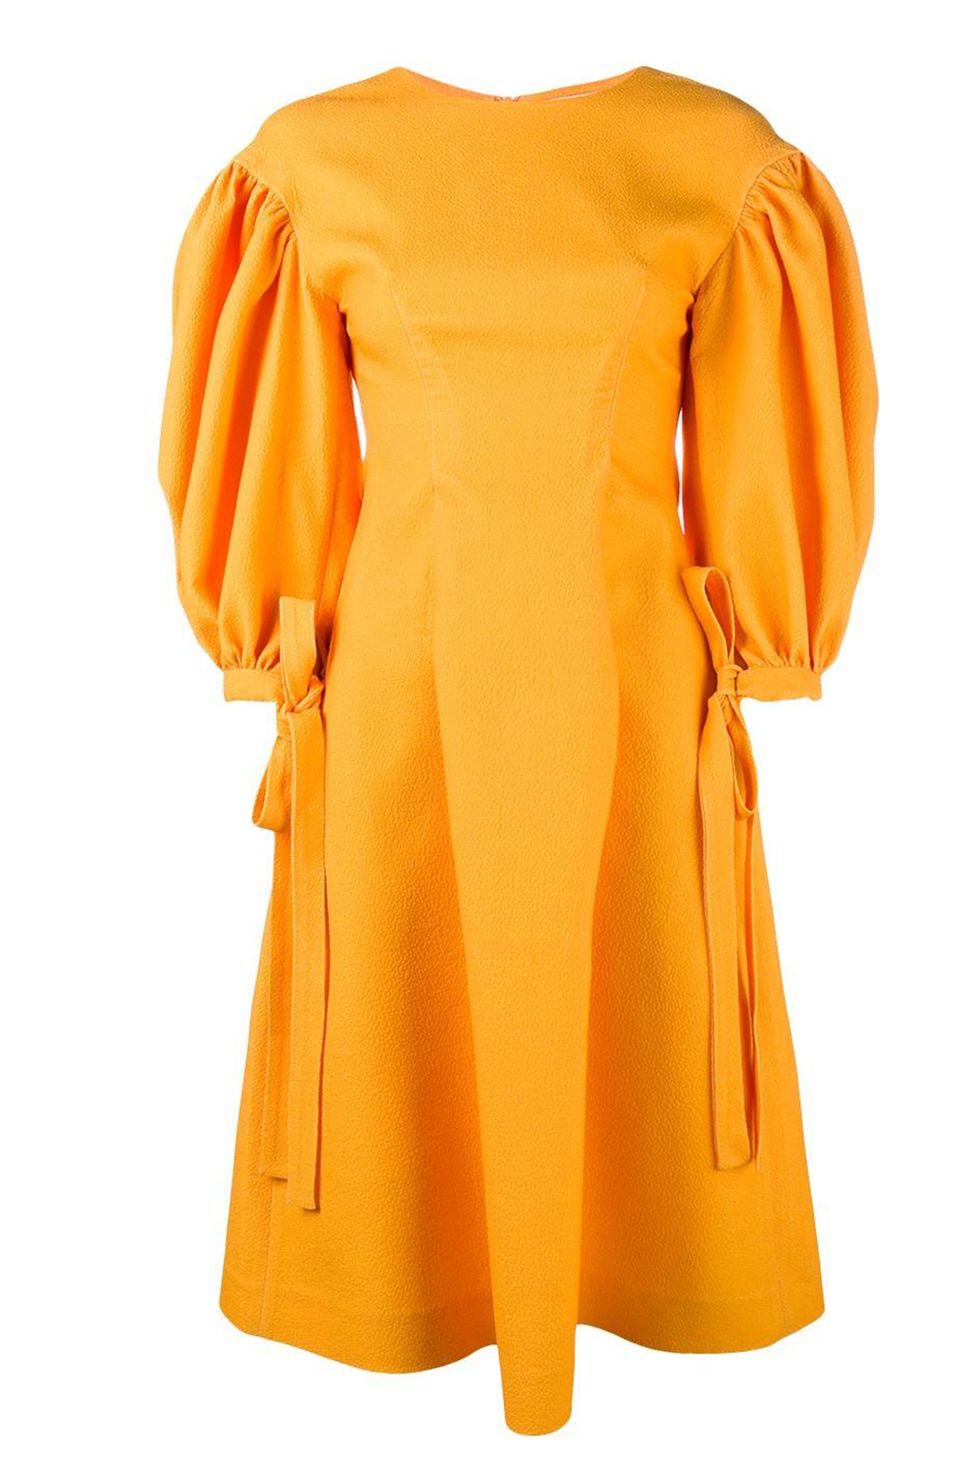 Clothing, Yellow, Orange, Sleeve, Dress, Outerwear, Day dress, Cocktail dress, Neck, Blouse, 